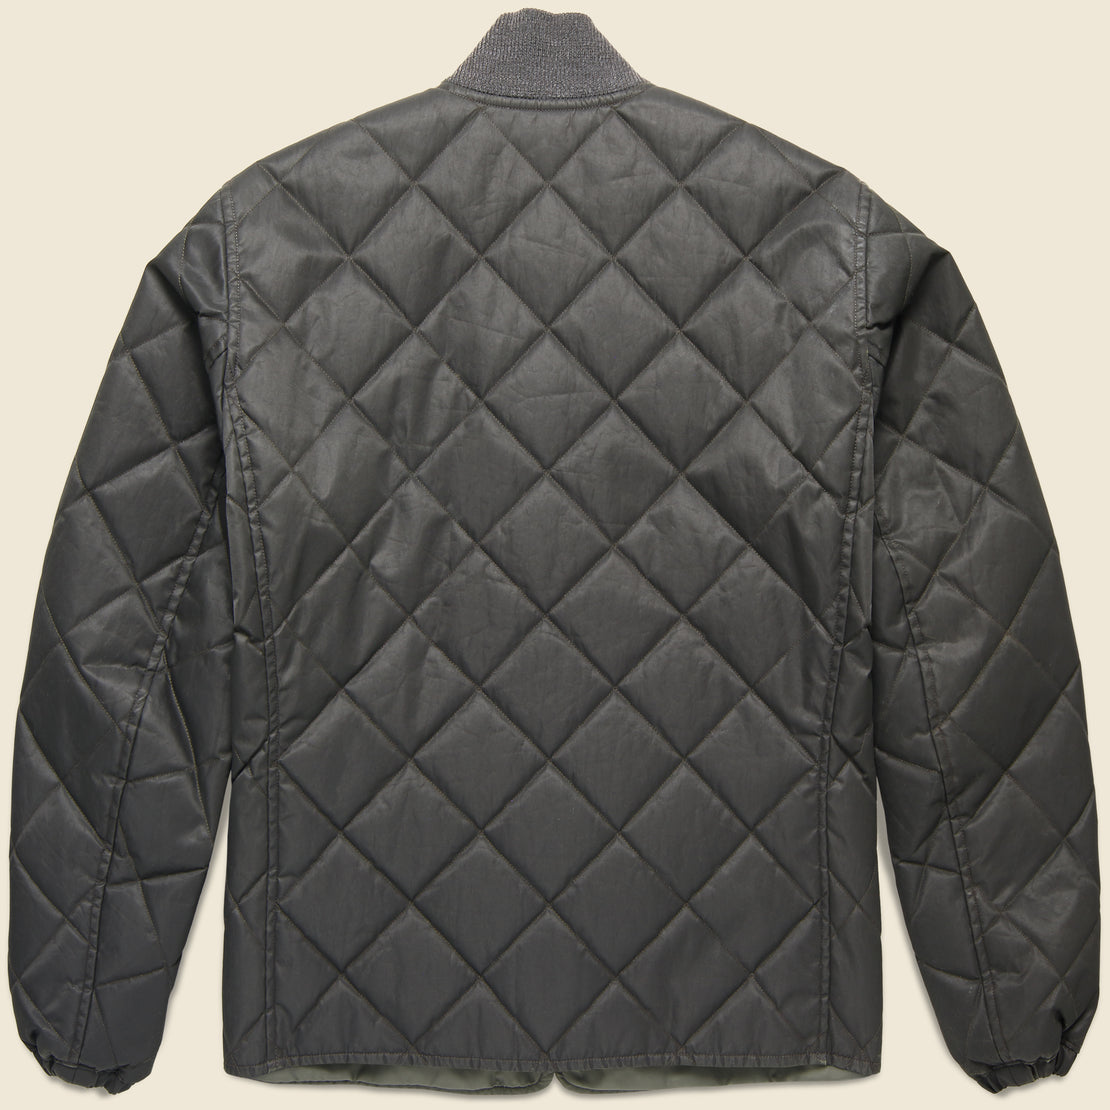 Coalville Quilted Jacket - Vintage Black - RRL - STAG Provisions - Outerwear - Coat / Jacket